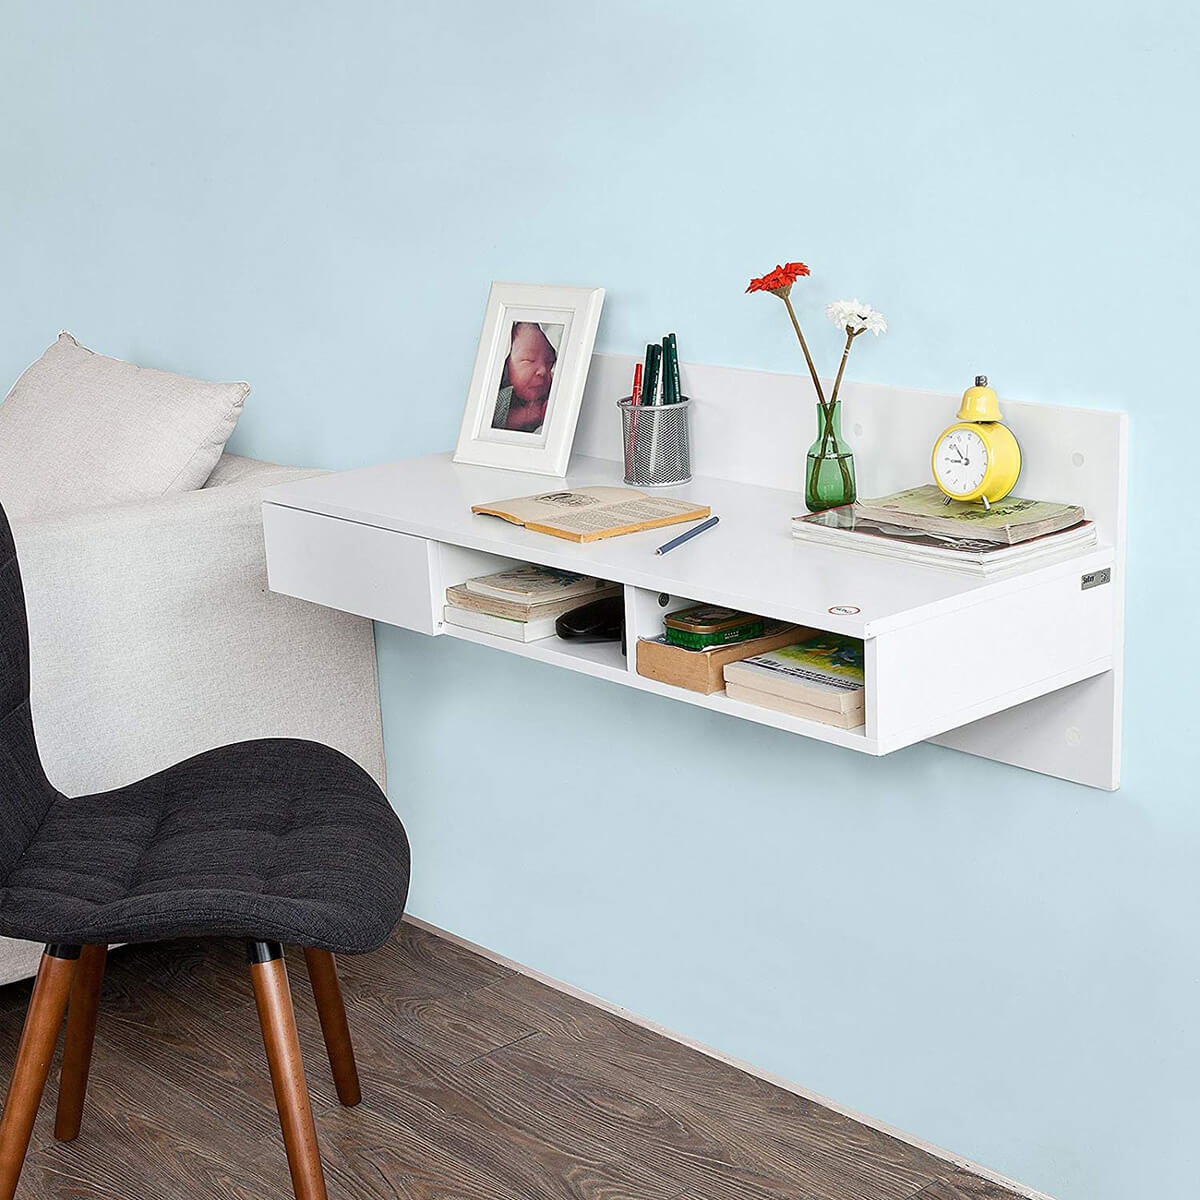 Solid Wall Home Office Desk Idea